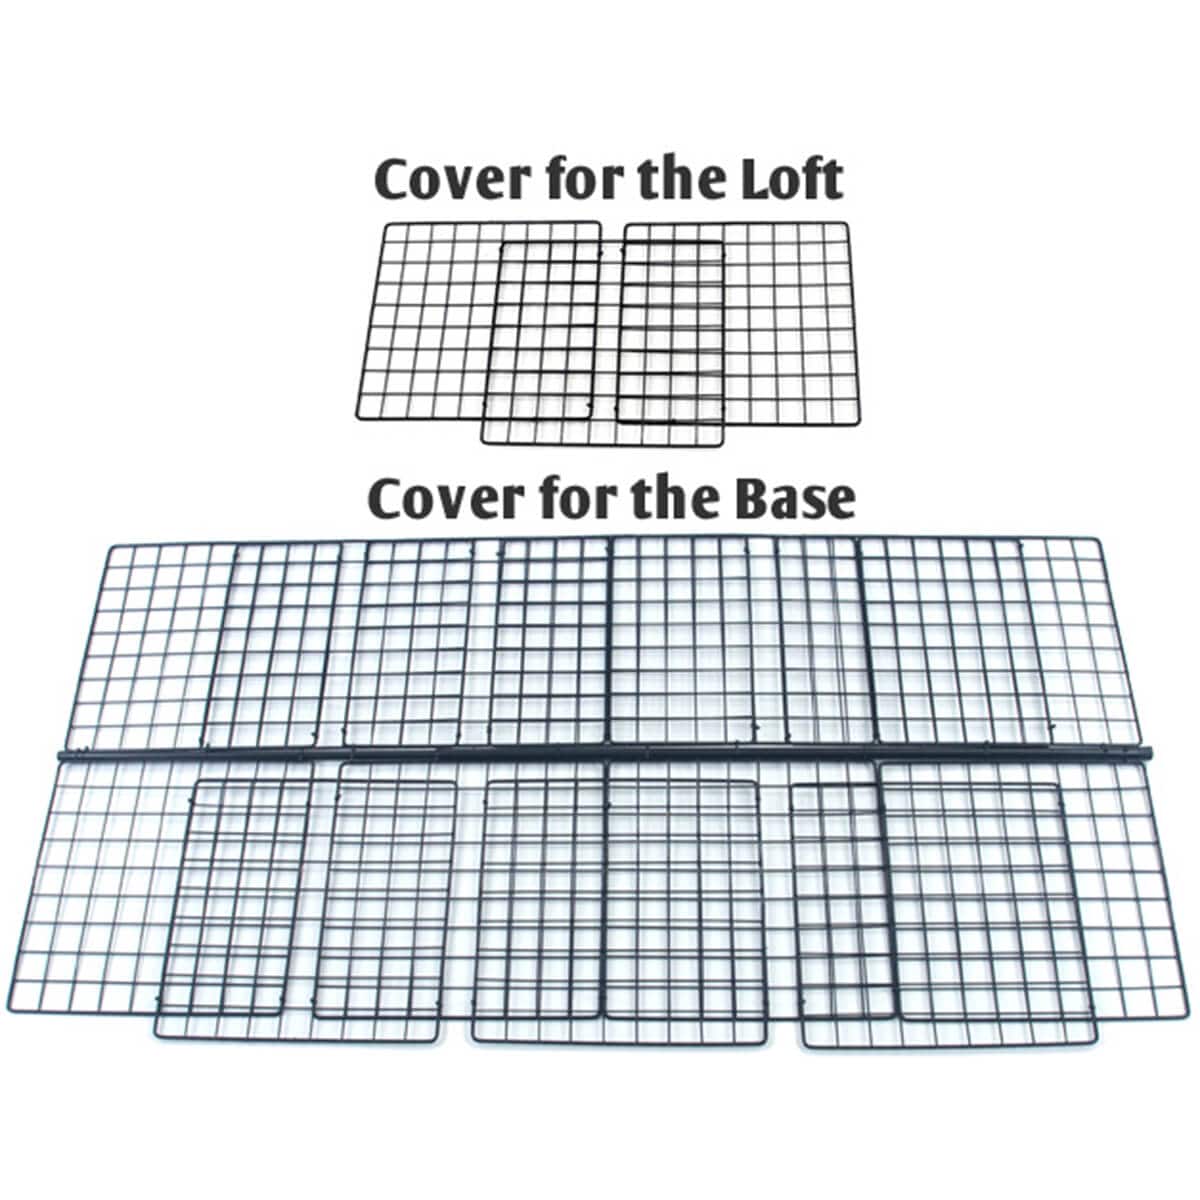 How to lay your grids out for a XL/narrow covered C&C guinea pig cage